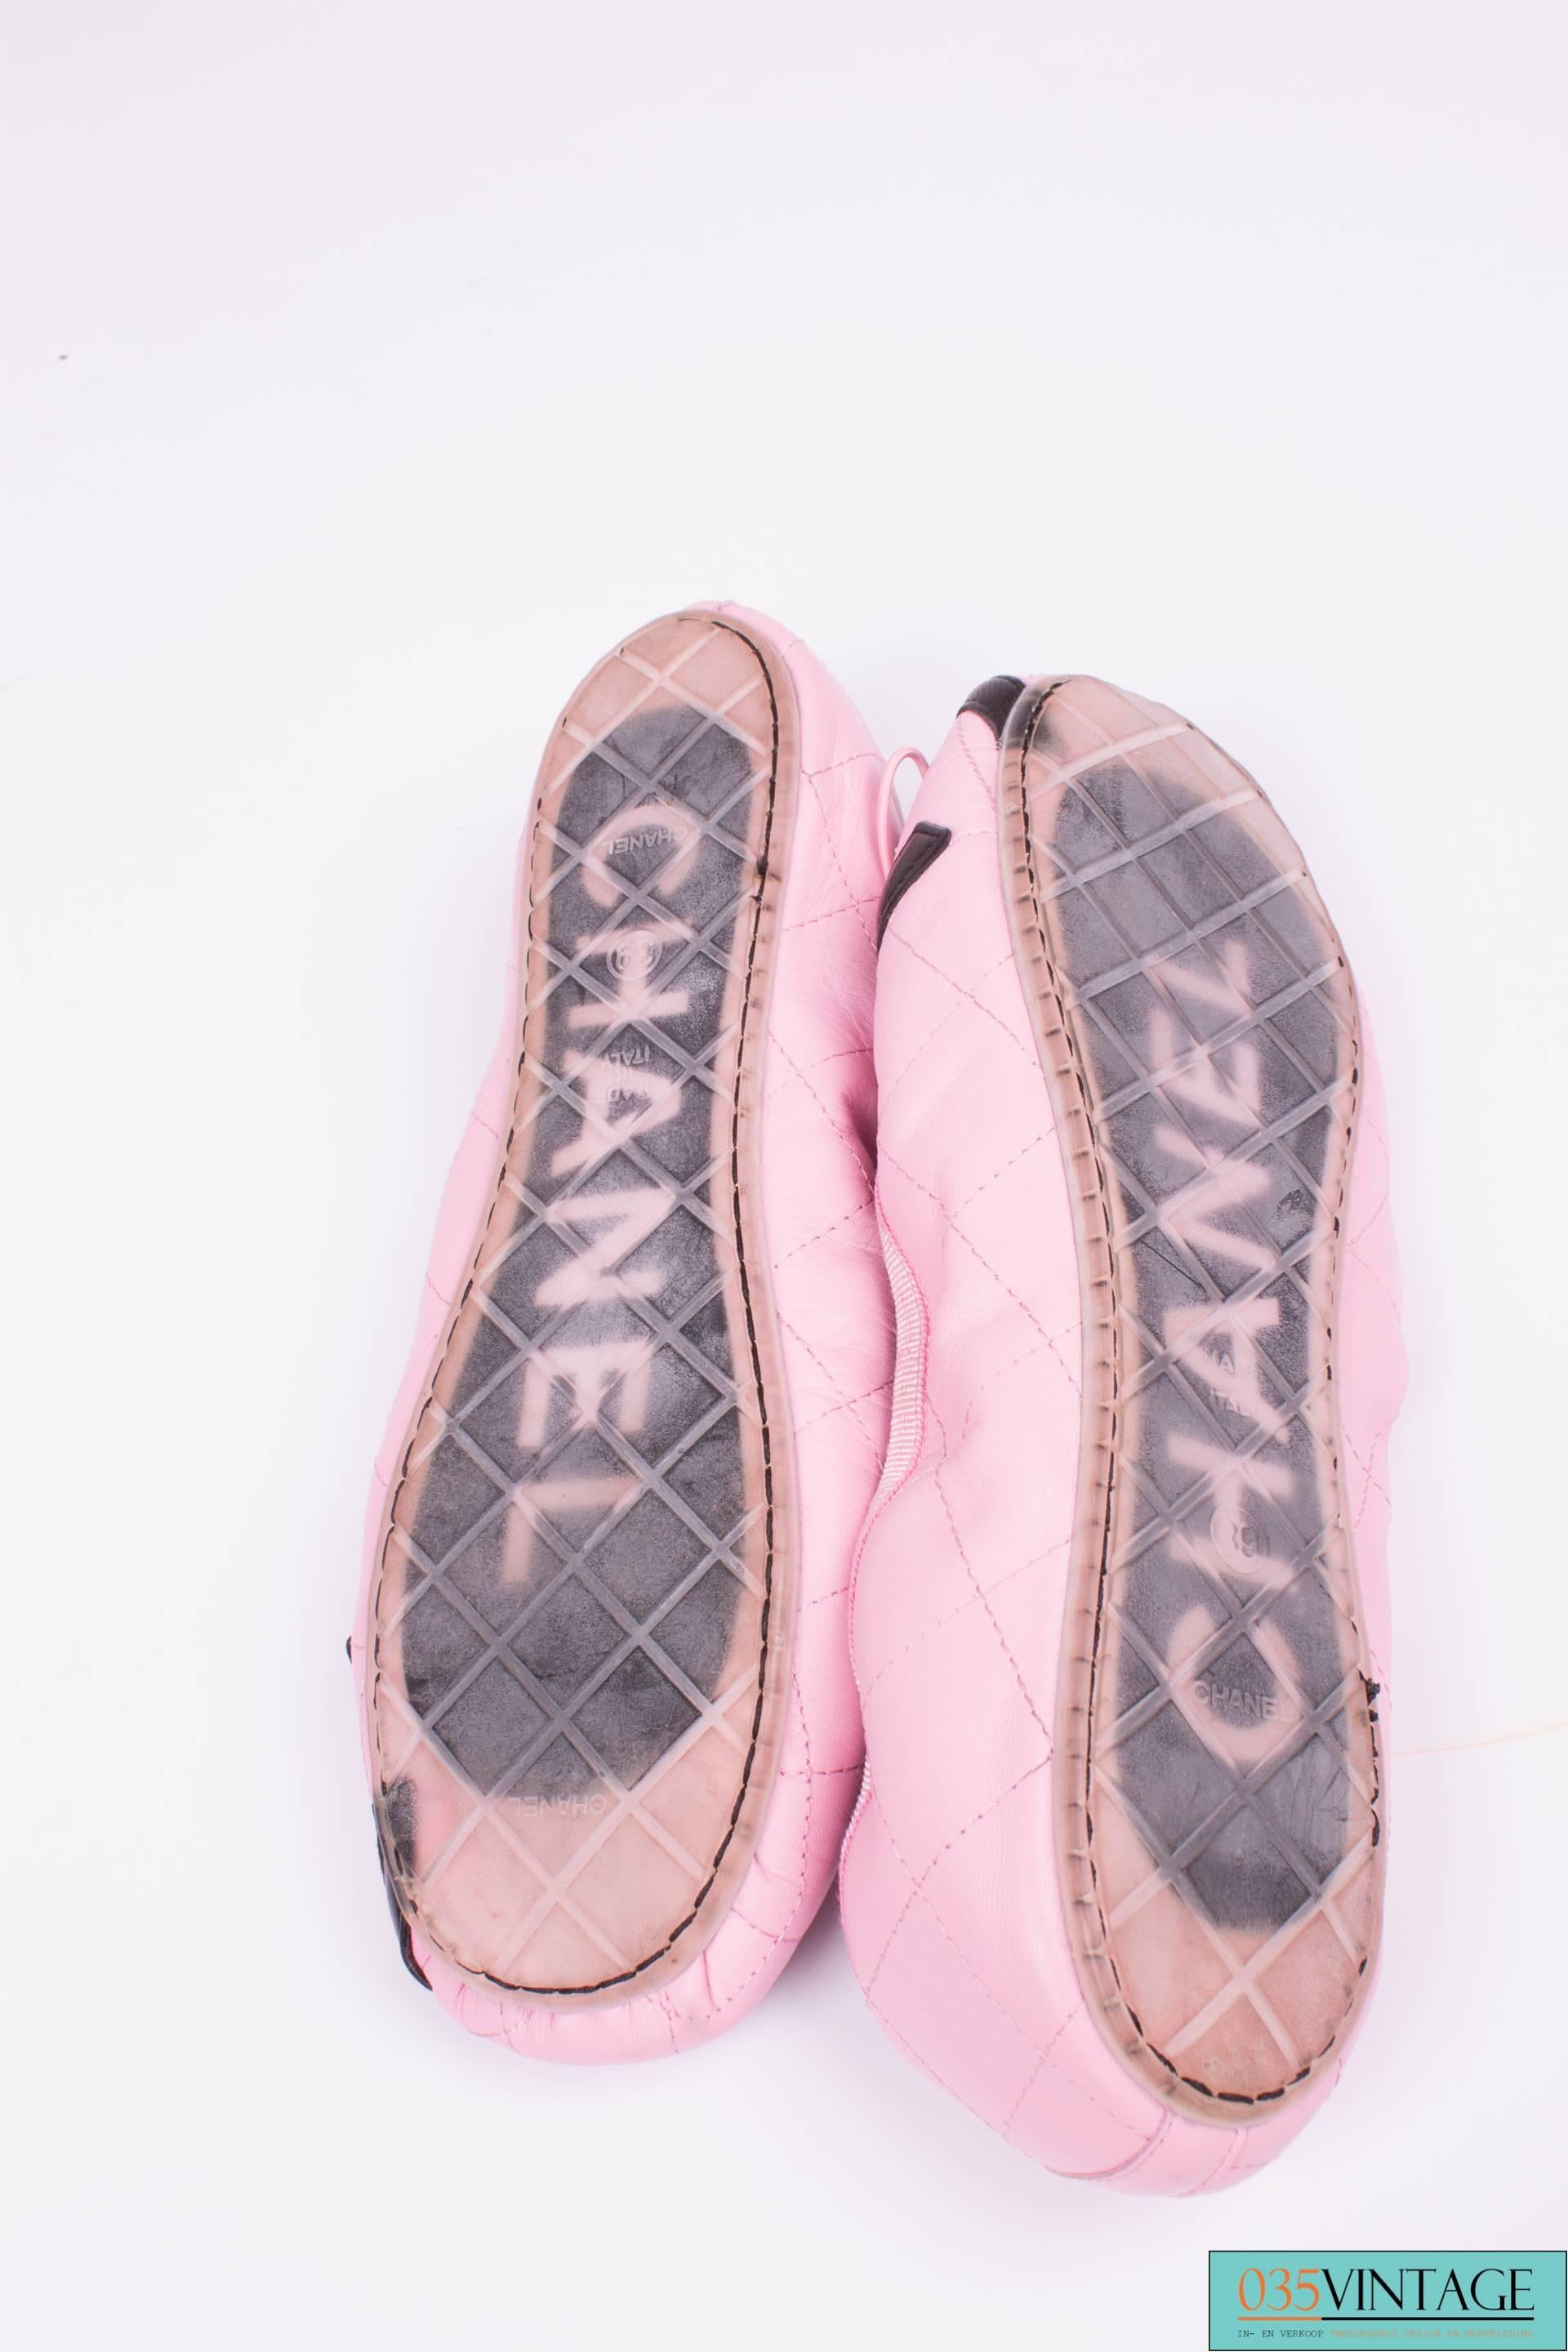 Chanel ballerina flats Cambon in pink en black leather.

A large interlocking CC in black and a little bow on the toe. No heel, transparent rubber sole. Maybe worn once, a little abraded spot on the heel. Furthermore in excellent condition, come